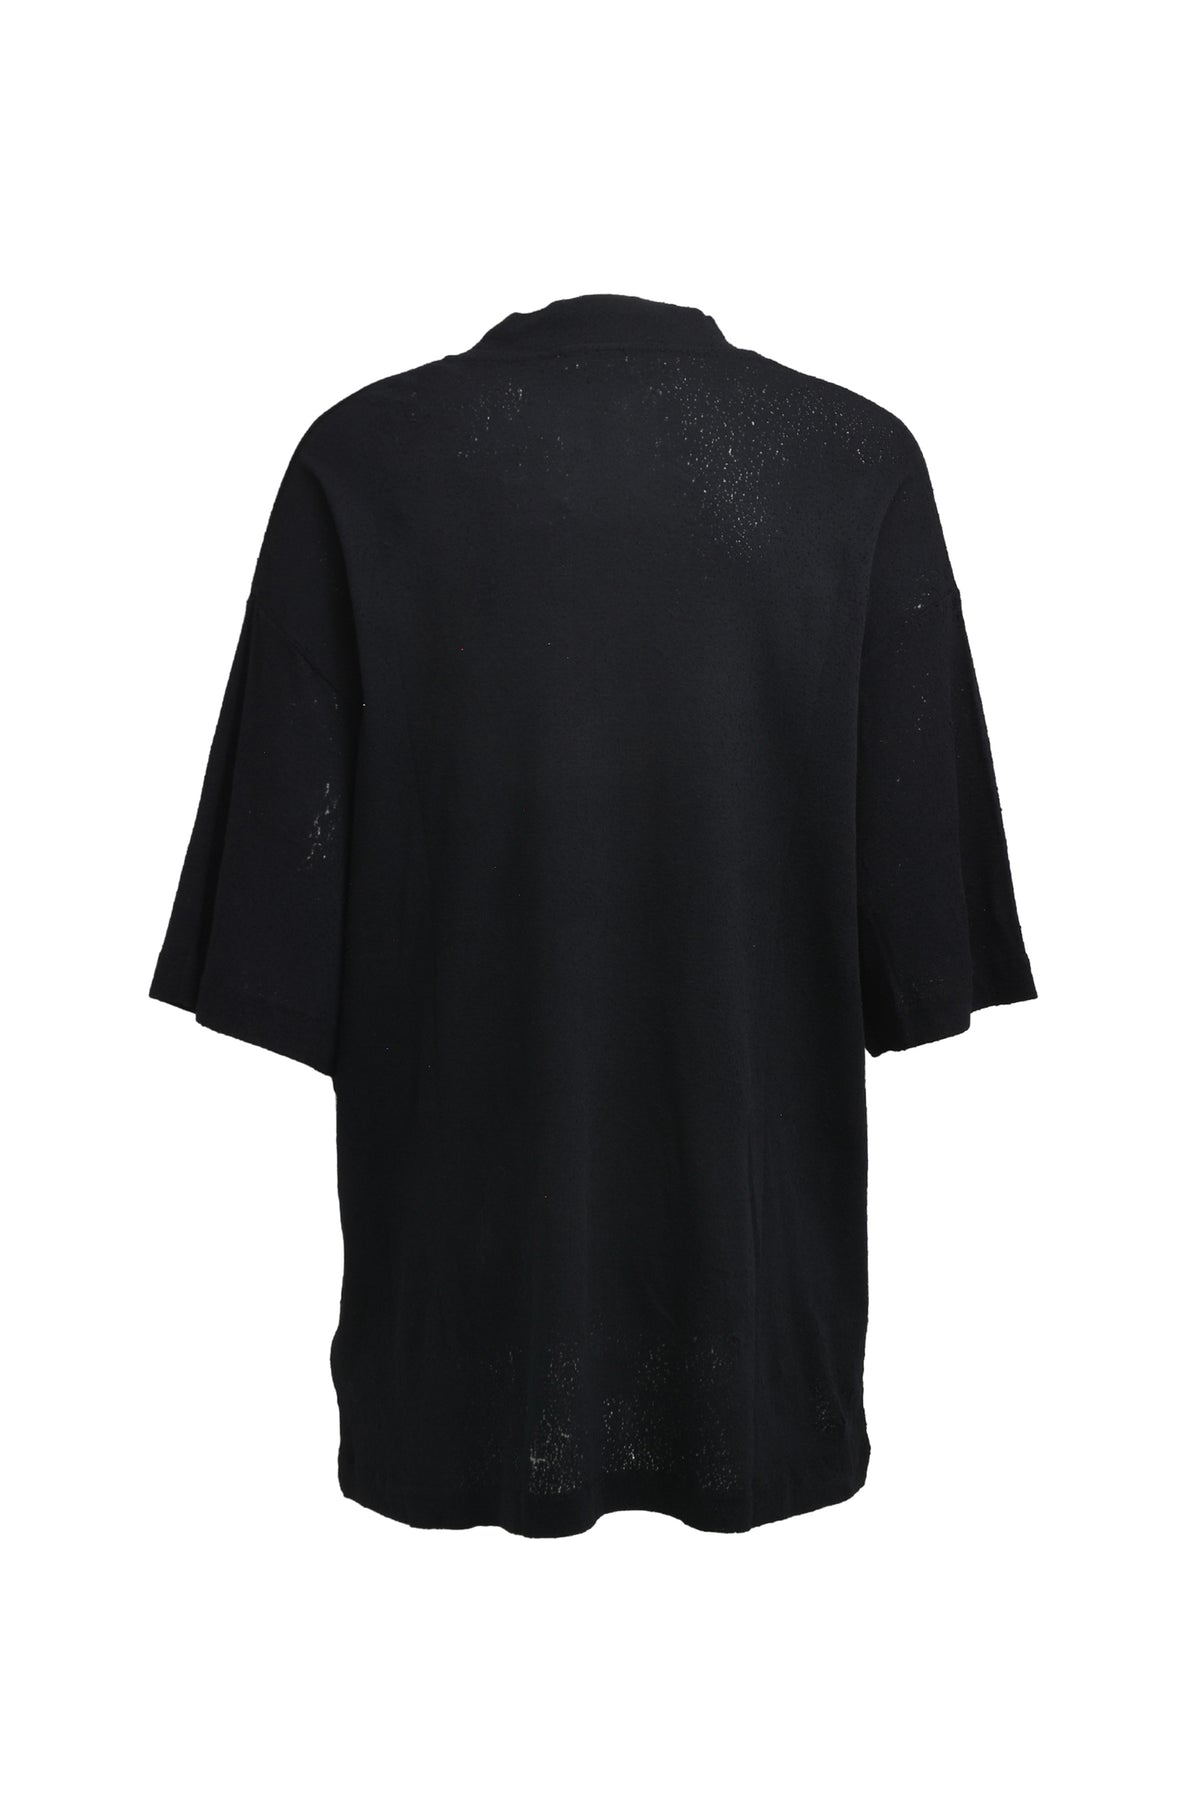 DISTRESSED OVERSIZED T-SHIRT / BLK